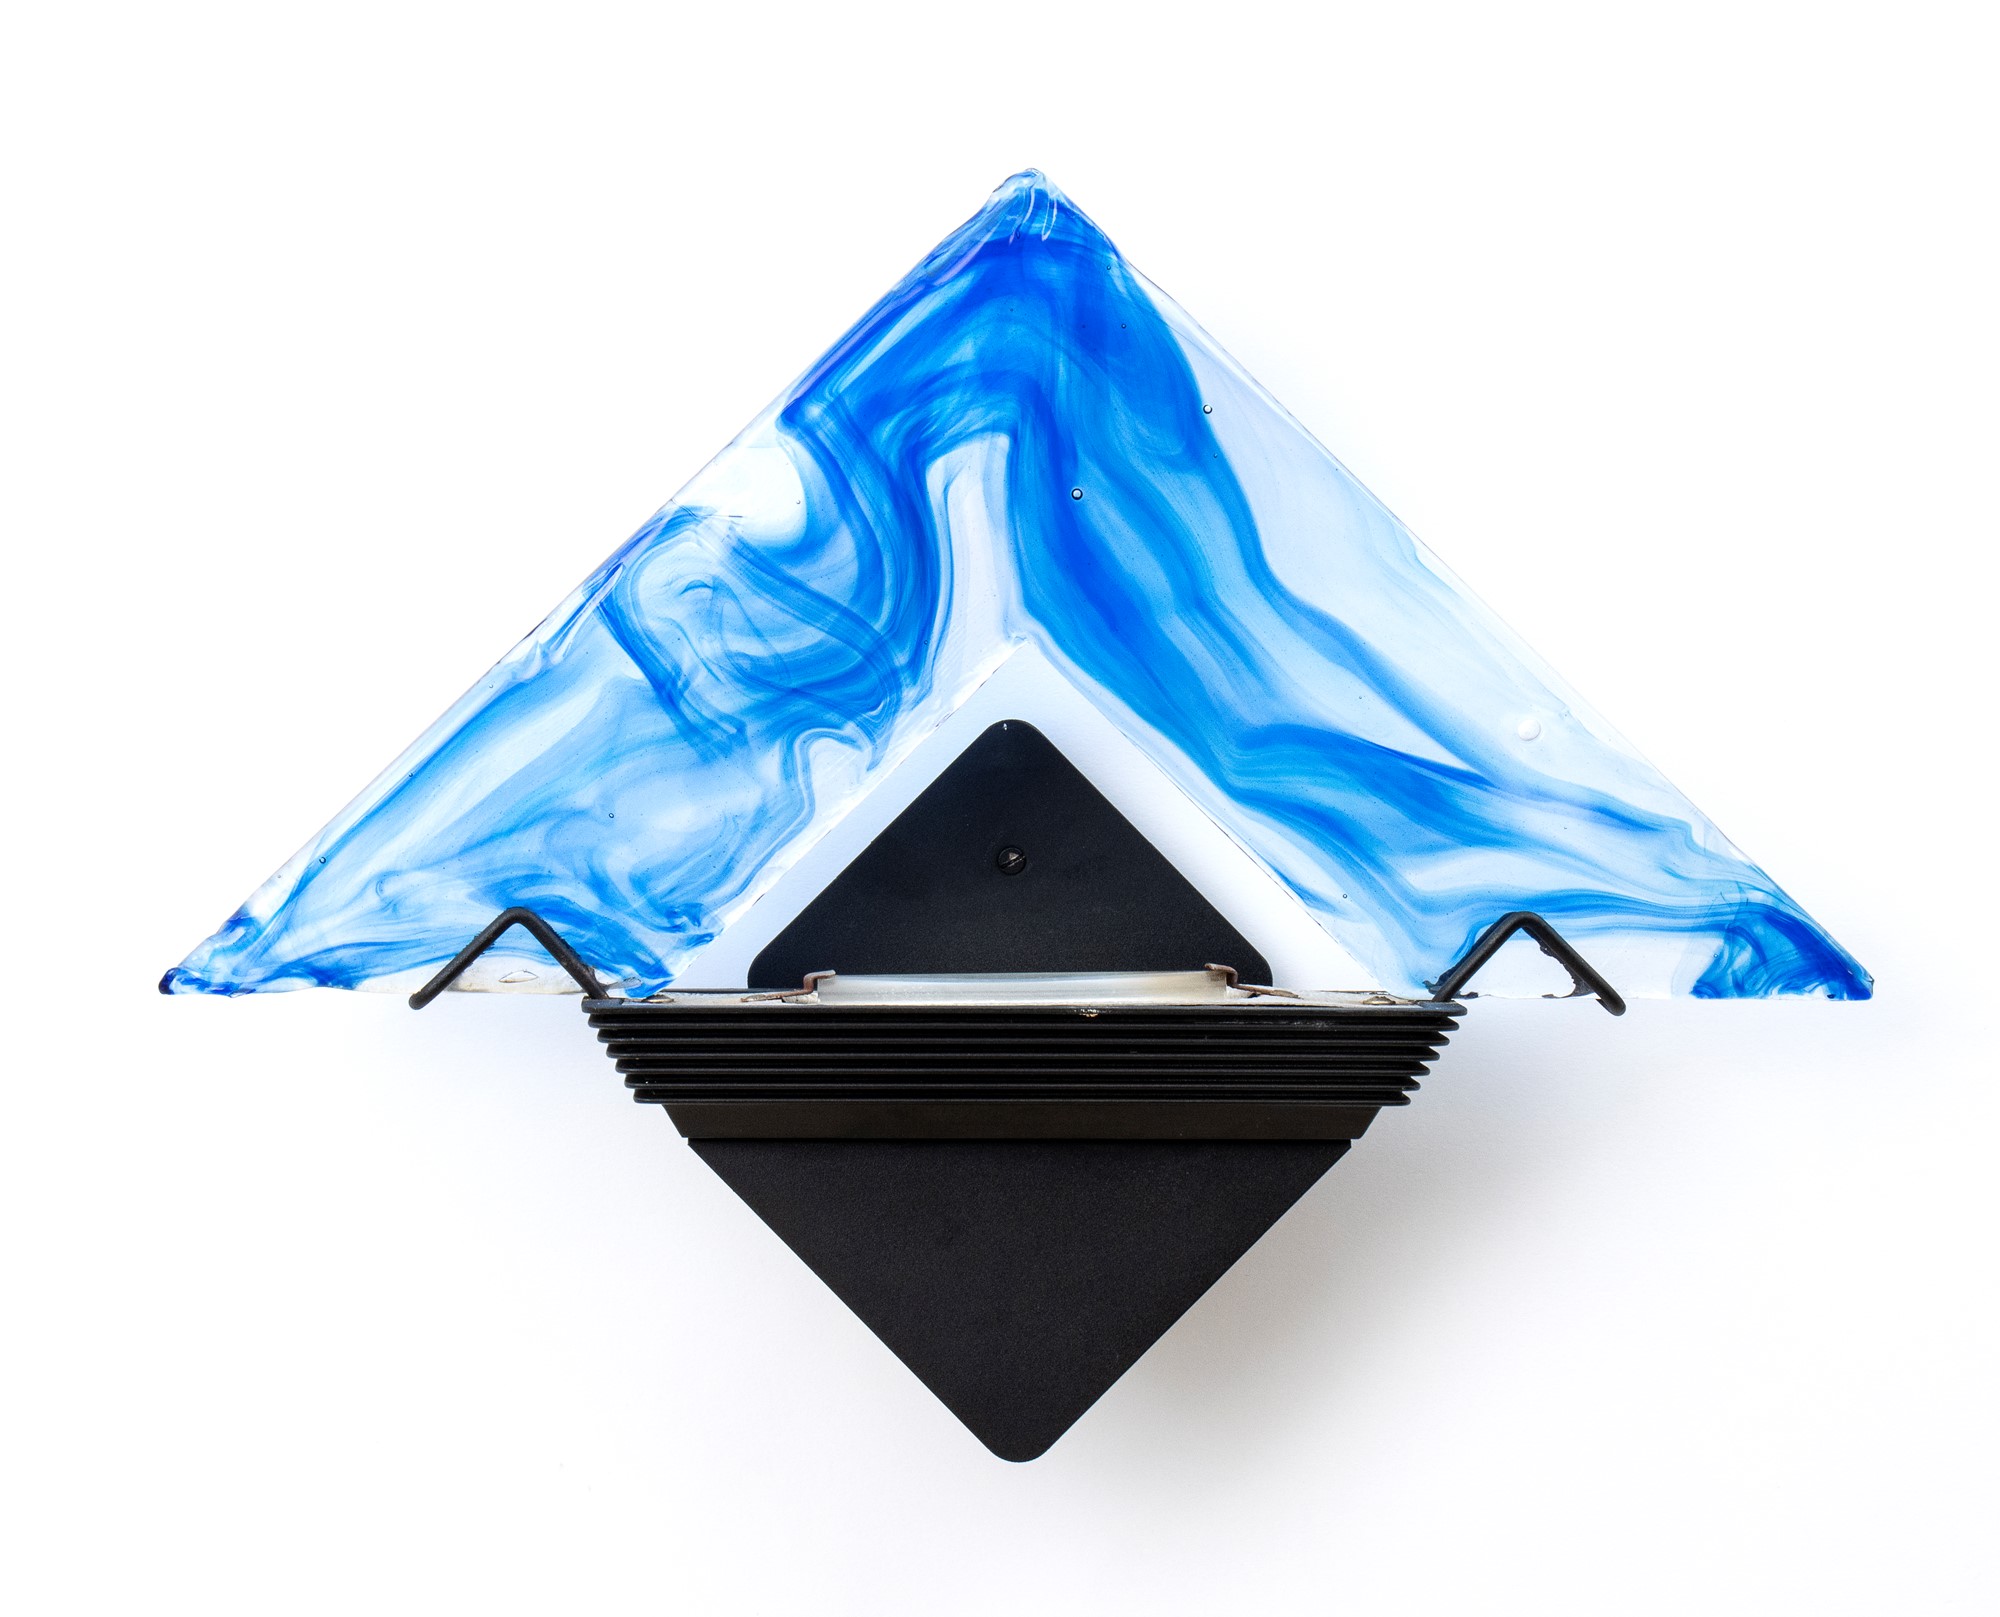 La Murrina wing lamp in hand blown Murano glass mounted on a triangular frame - Image 2 of 27